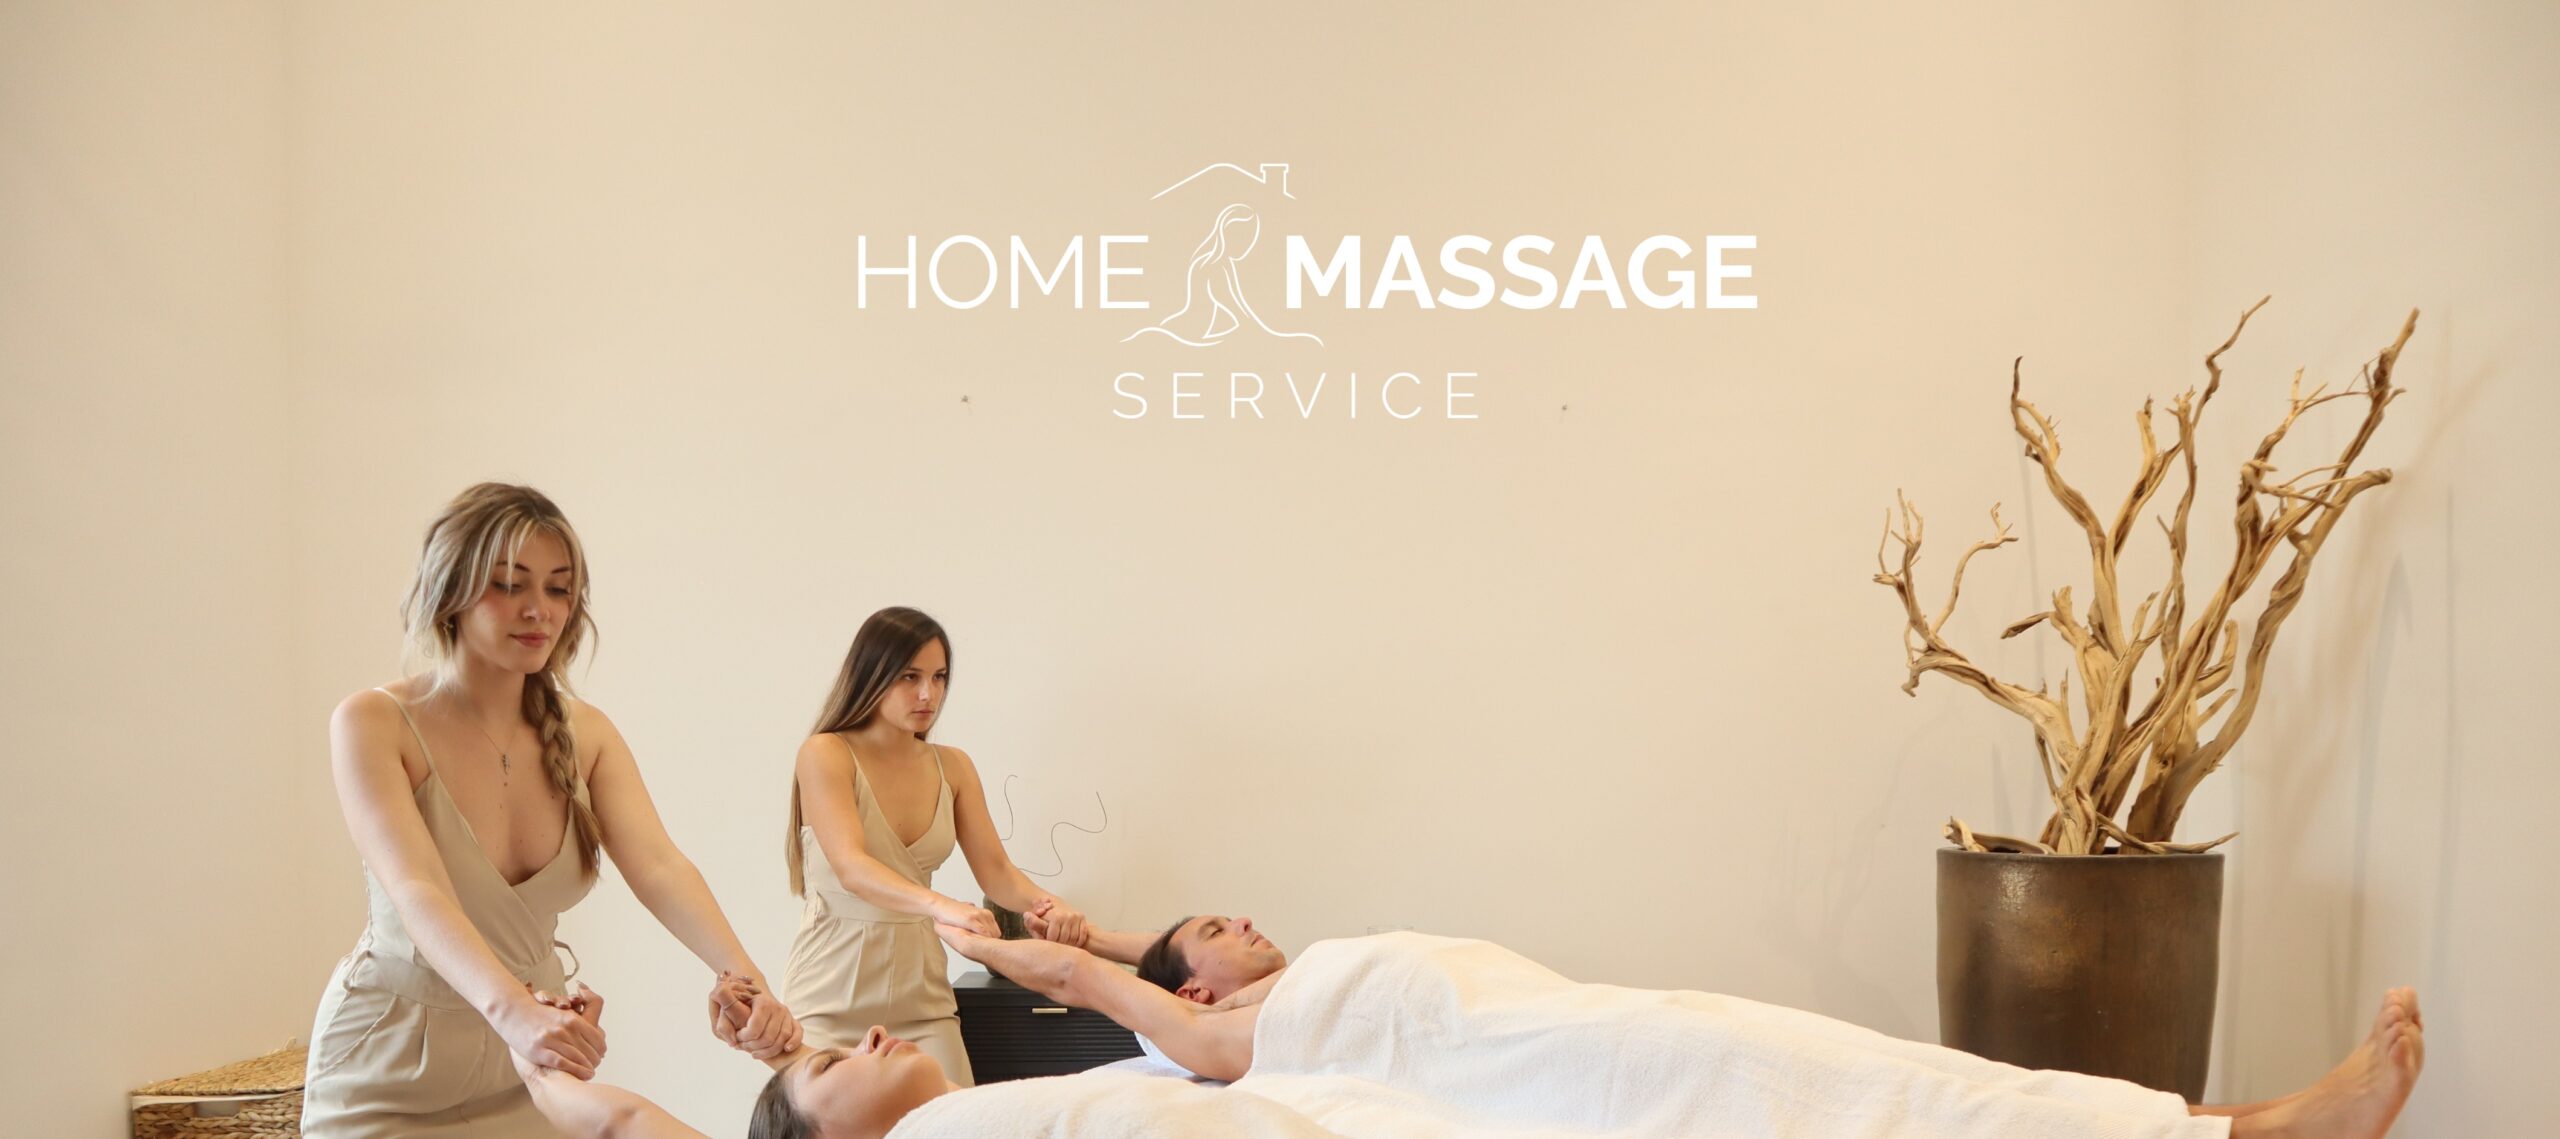 Couples massage at home. 
Couples massage booking 
Offer couple massage at home
Best price simultaneous couple service